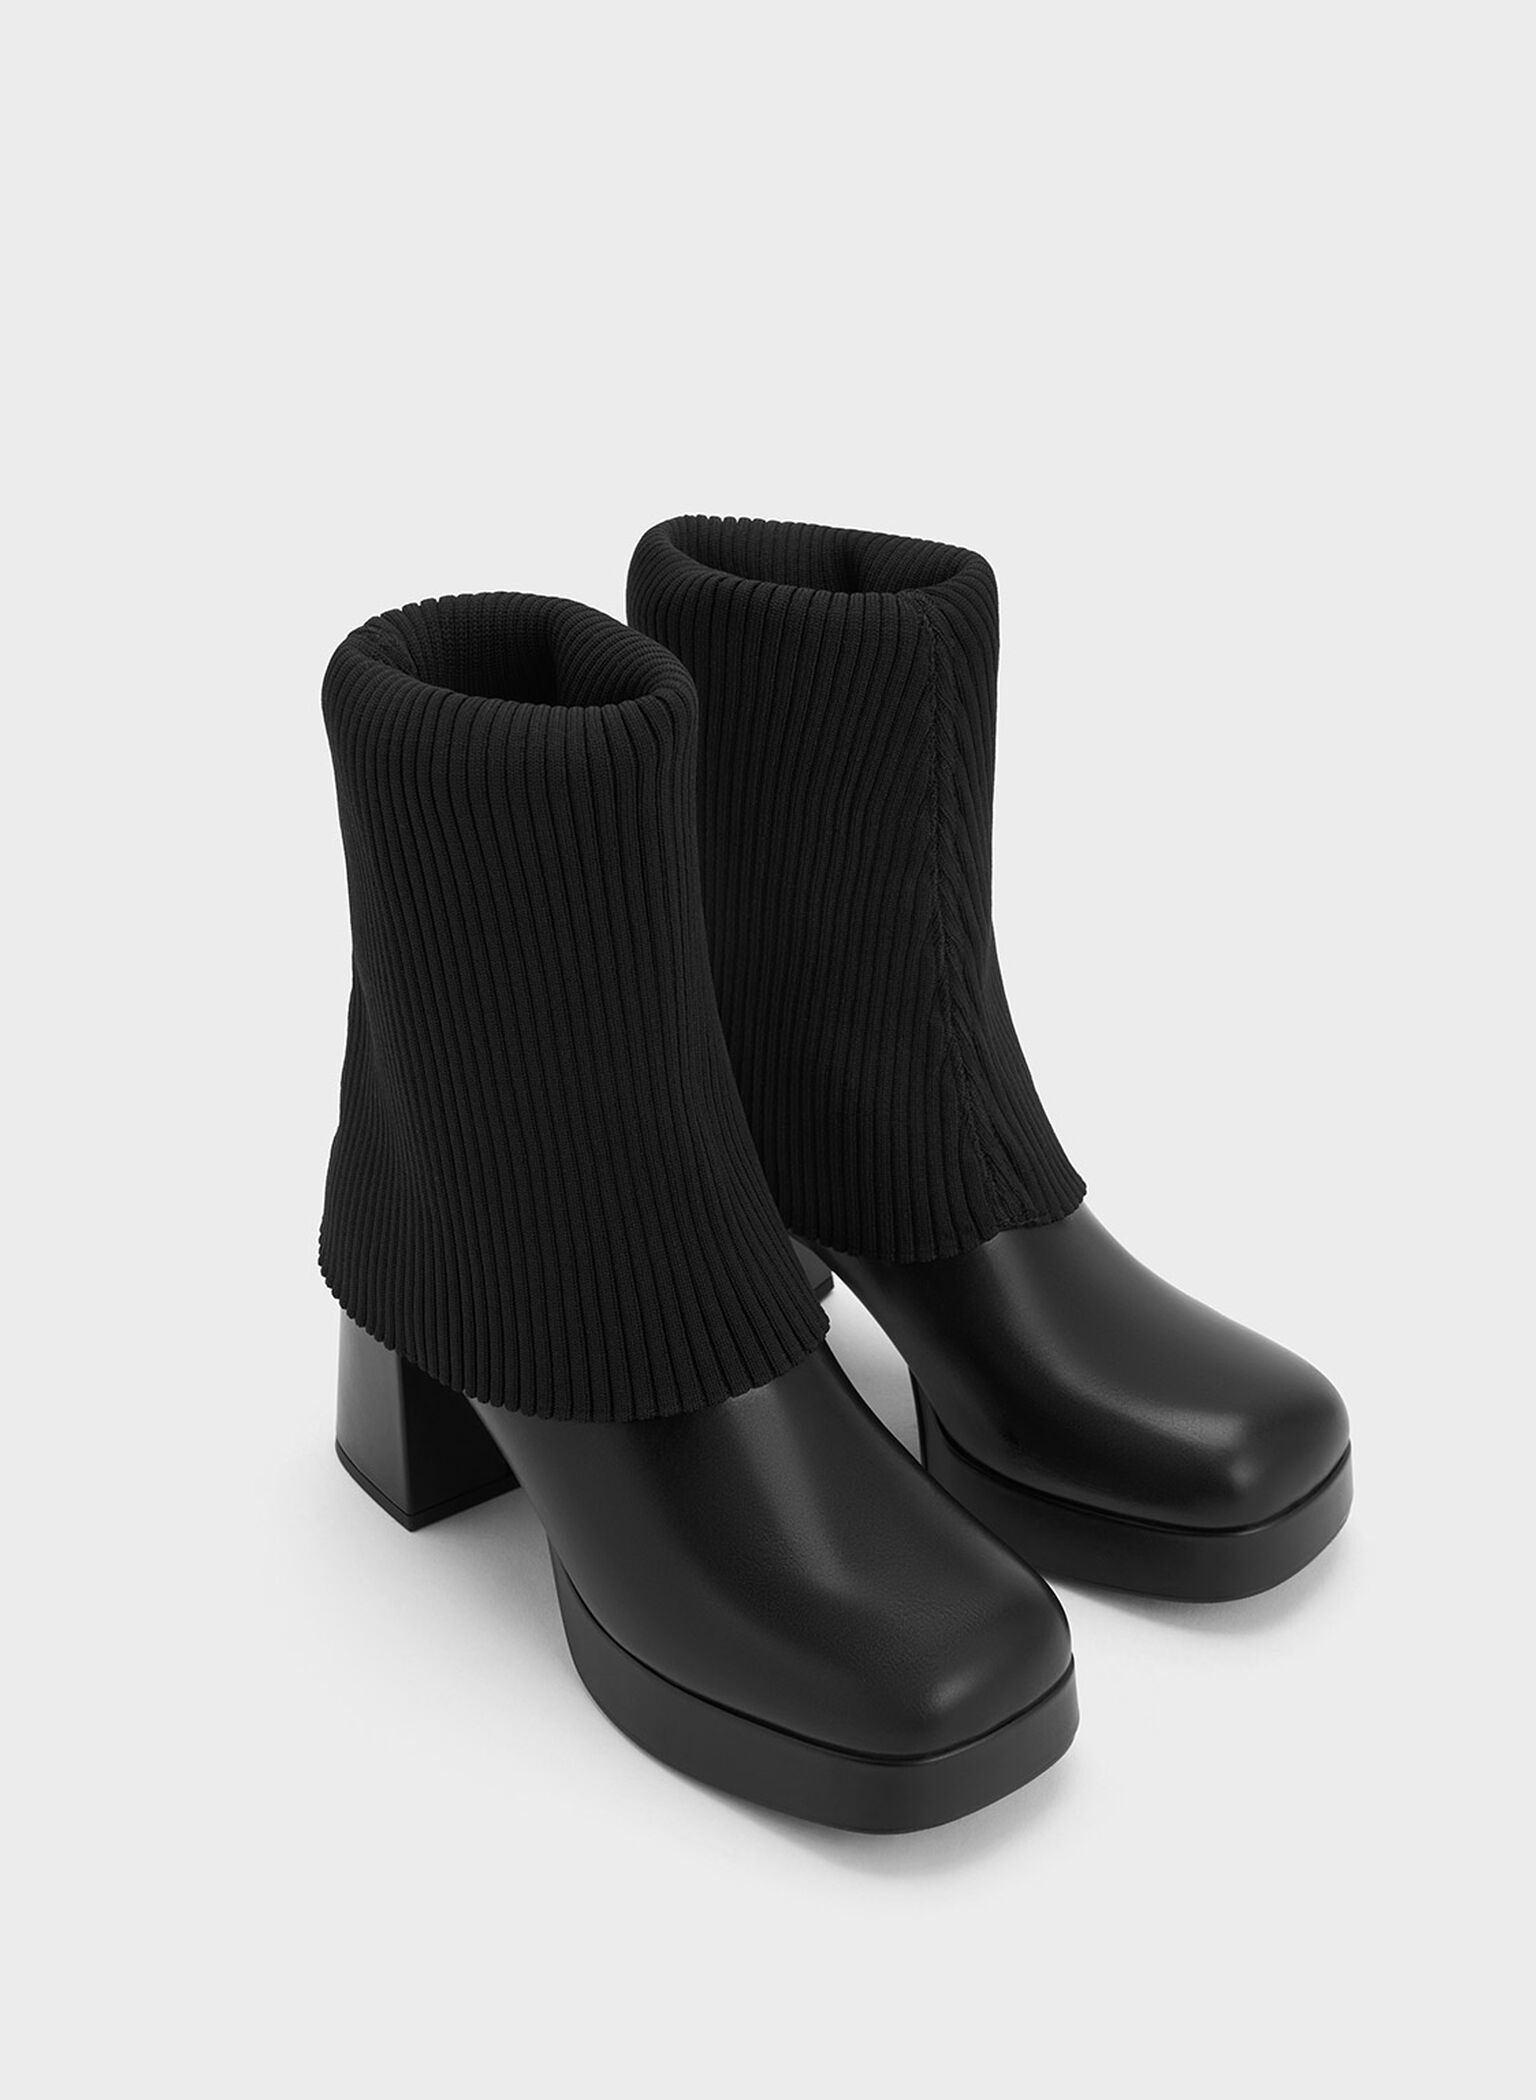 Evie Knitted-Sock Ankle Boots, Black, hi-res